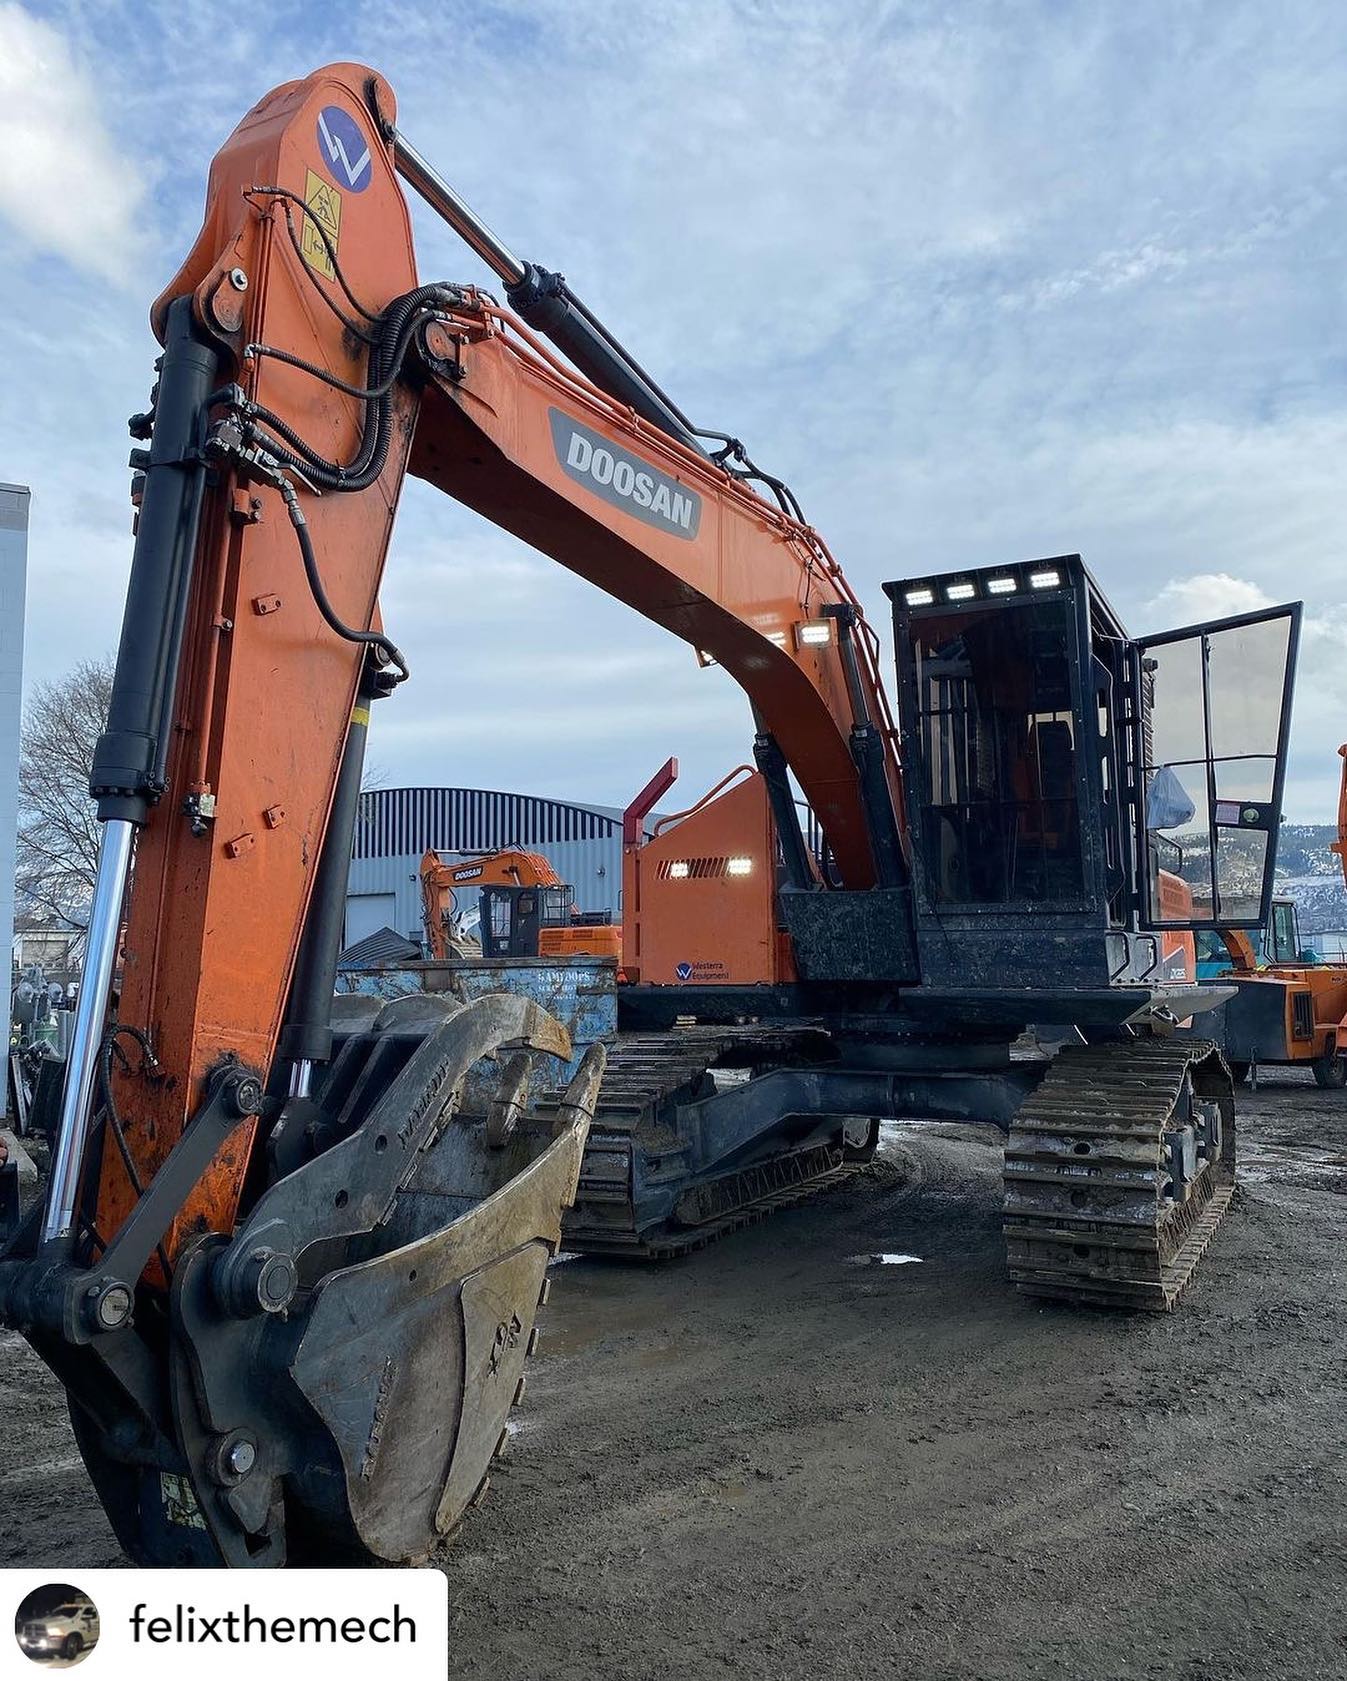 #repost from @felixthemech 

Available. Who’s looking for a road builder. Just came back. And itching to get back to work. Get ahold of @chad_bc_doosan if interested. #westerra #westerrakamloops #equipment #doosan #doosanexcavator #discoverdoosan @daequip